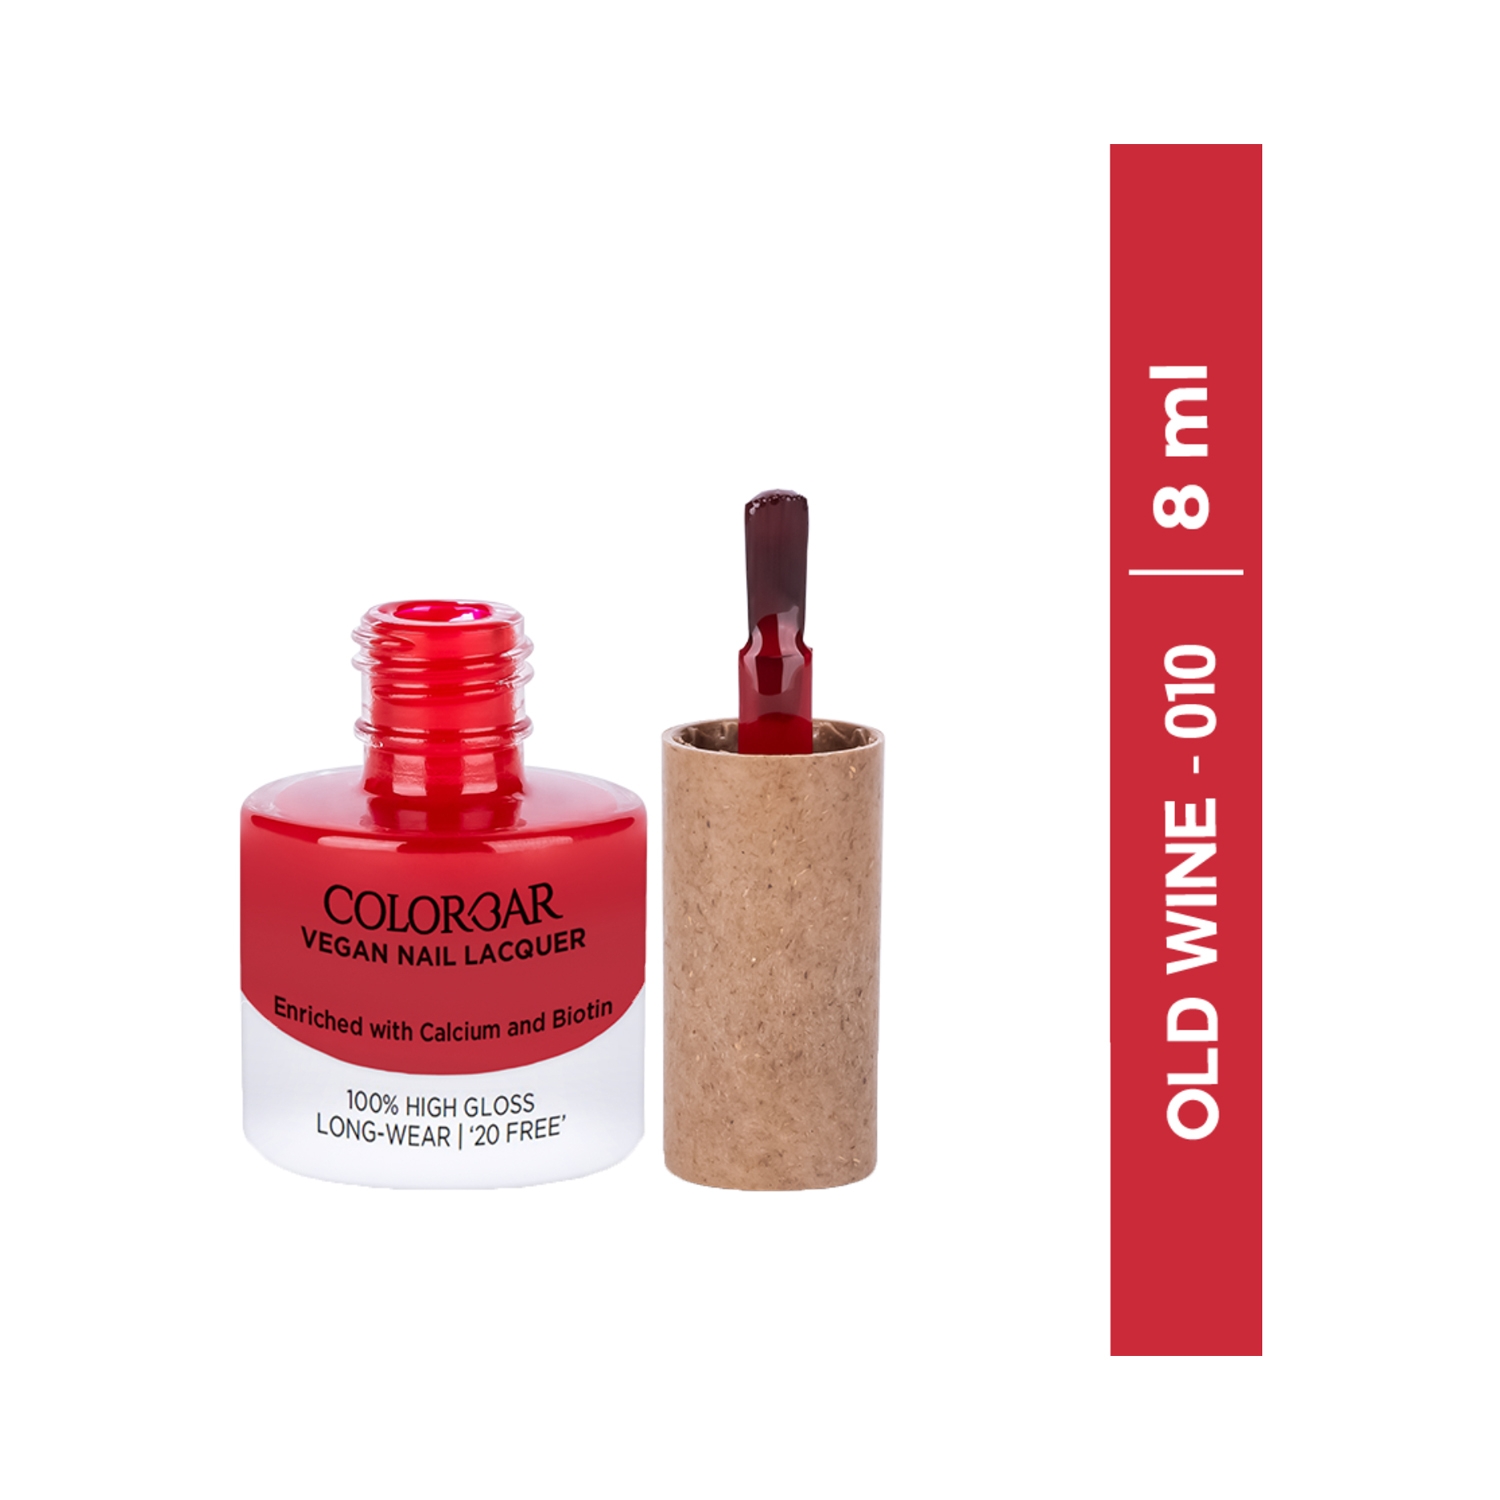 Colorbar | Colorbar Vegan Nail Lacquer - 010 Old Wine (8 ml)